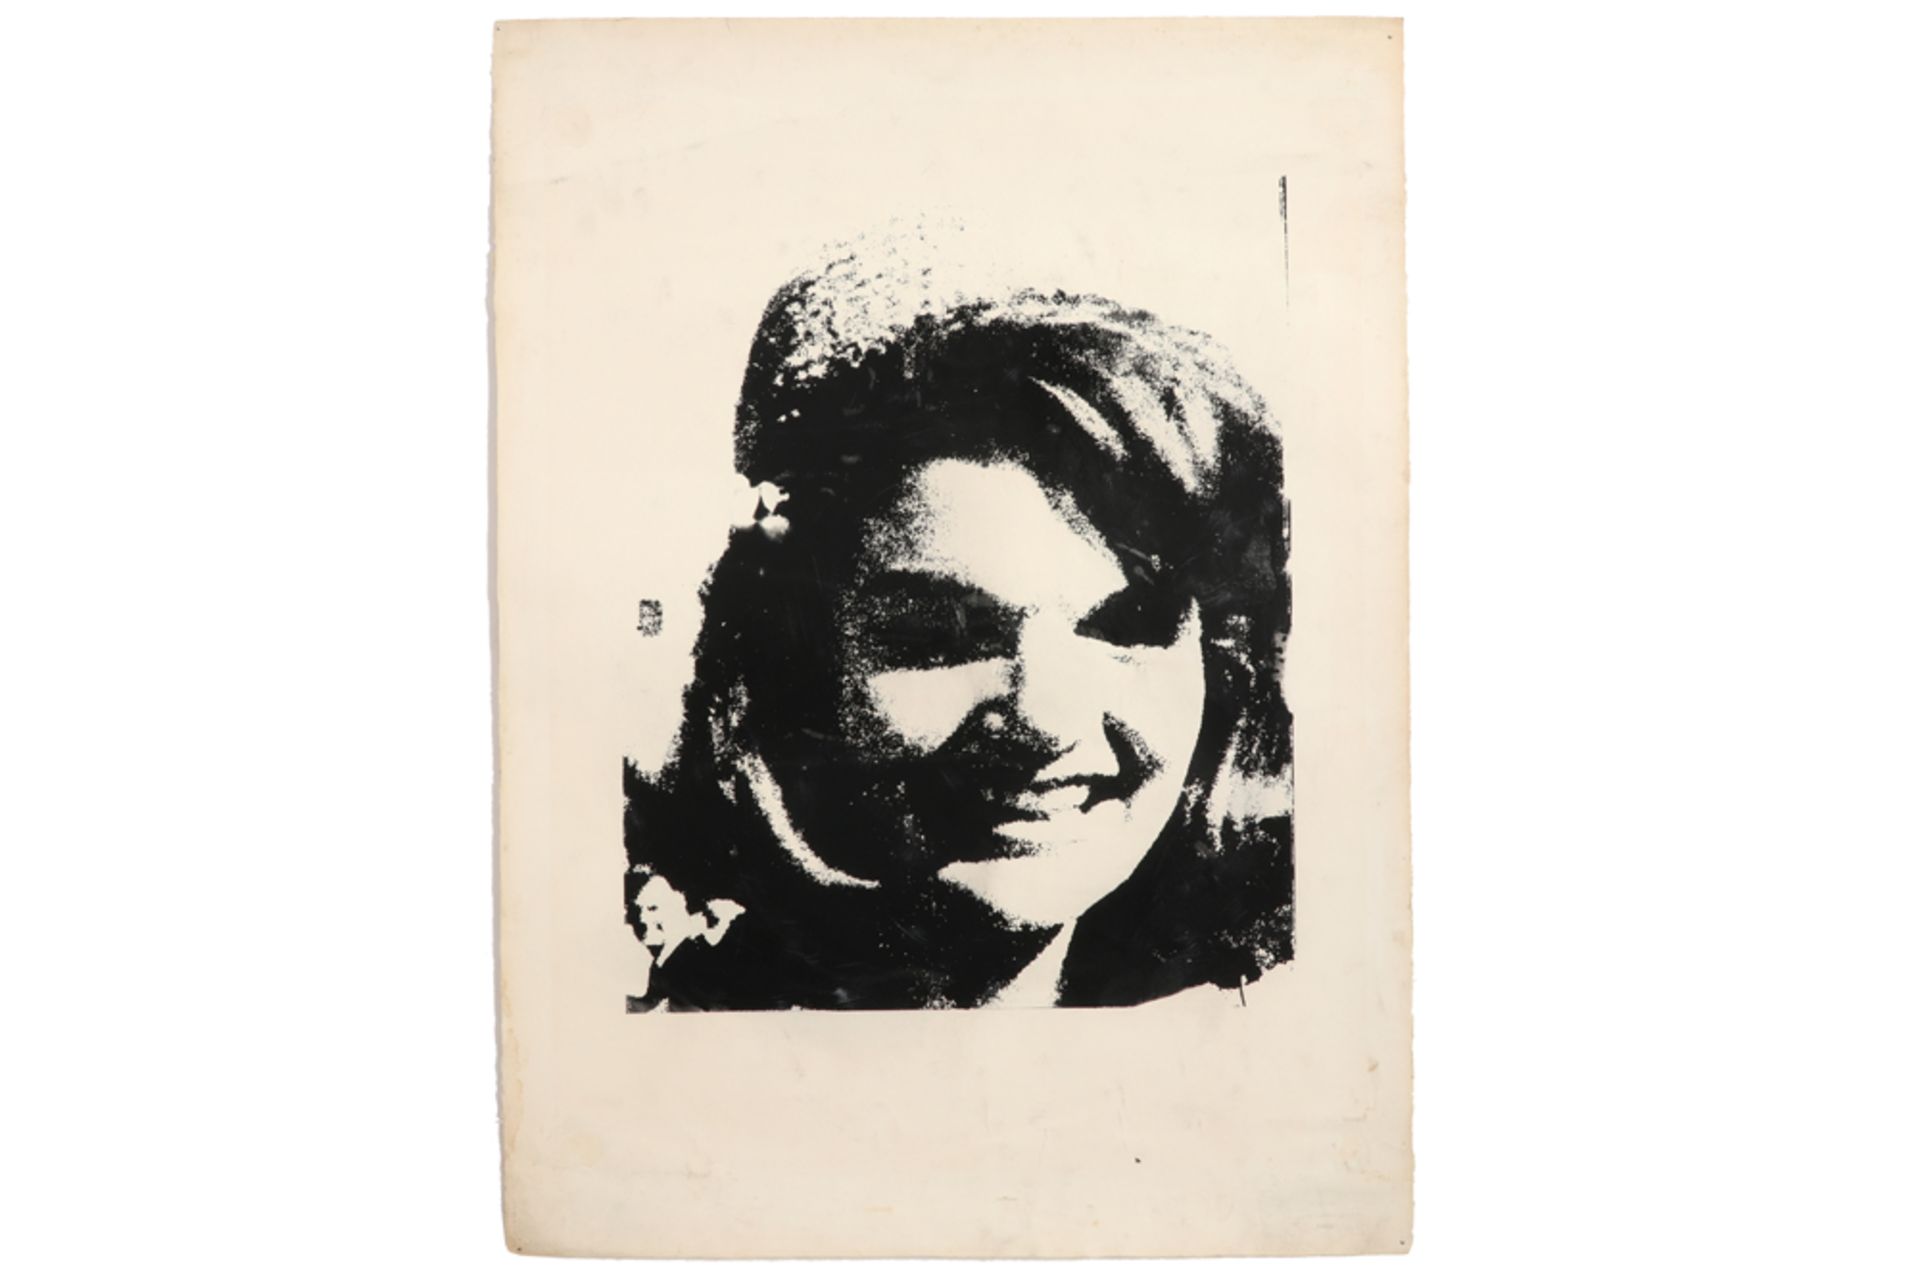 rare Andy Warhol "Jackie (Kennedy)" screenprint on Arches to be dated in 1964 presumably a proof